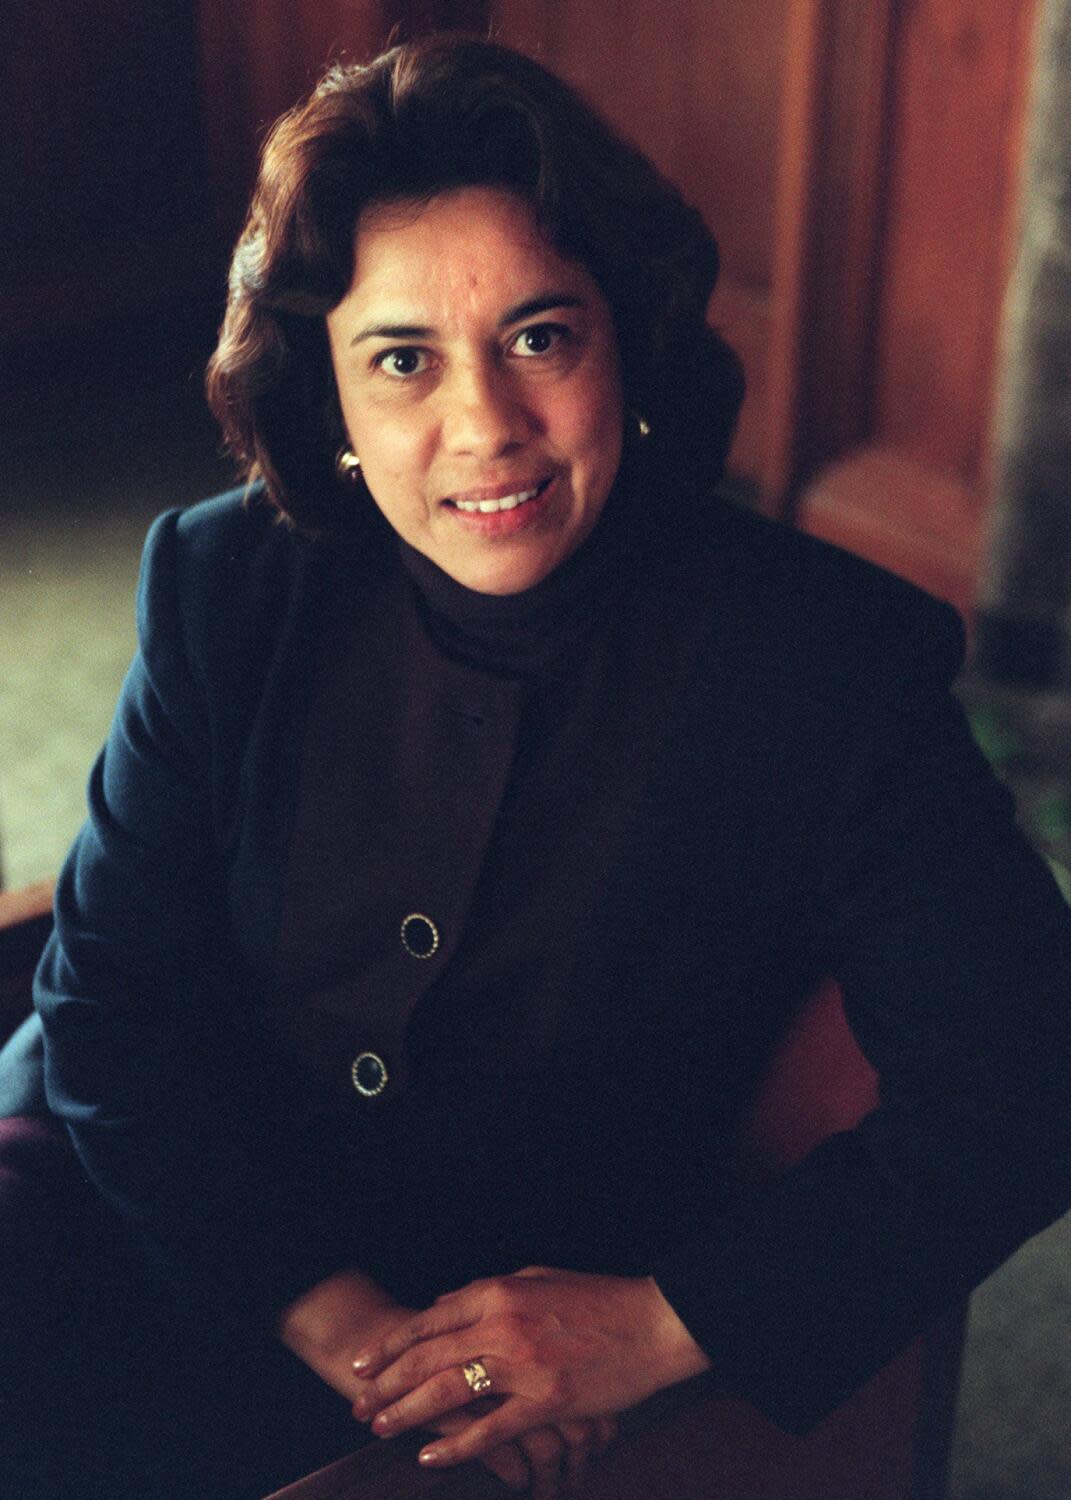 Antonia Hernández, framed waist and up, is seated with her hands folded in her lap, looking slightly up at the camera.